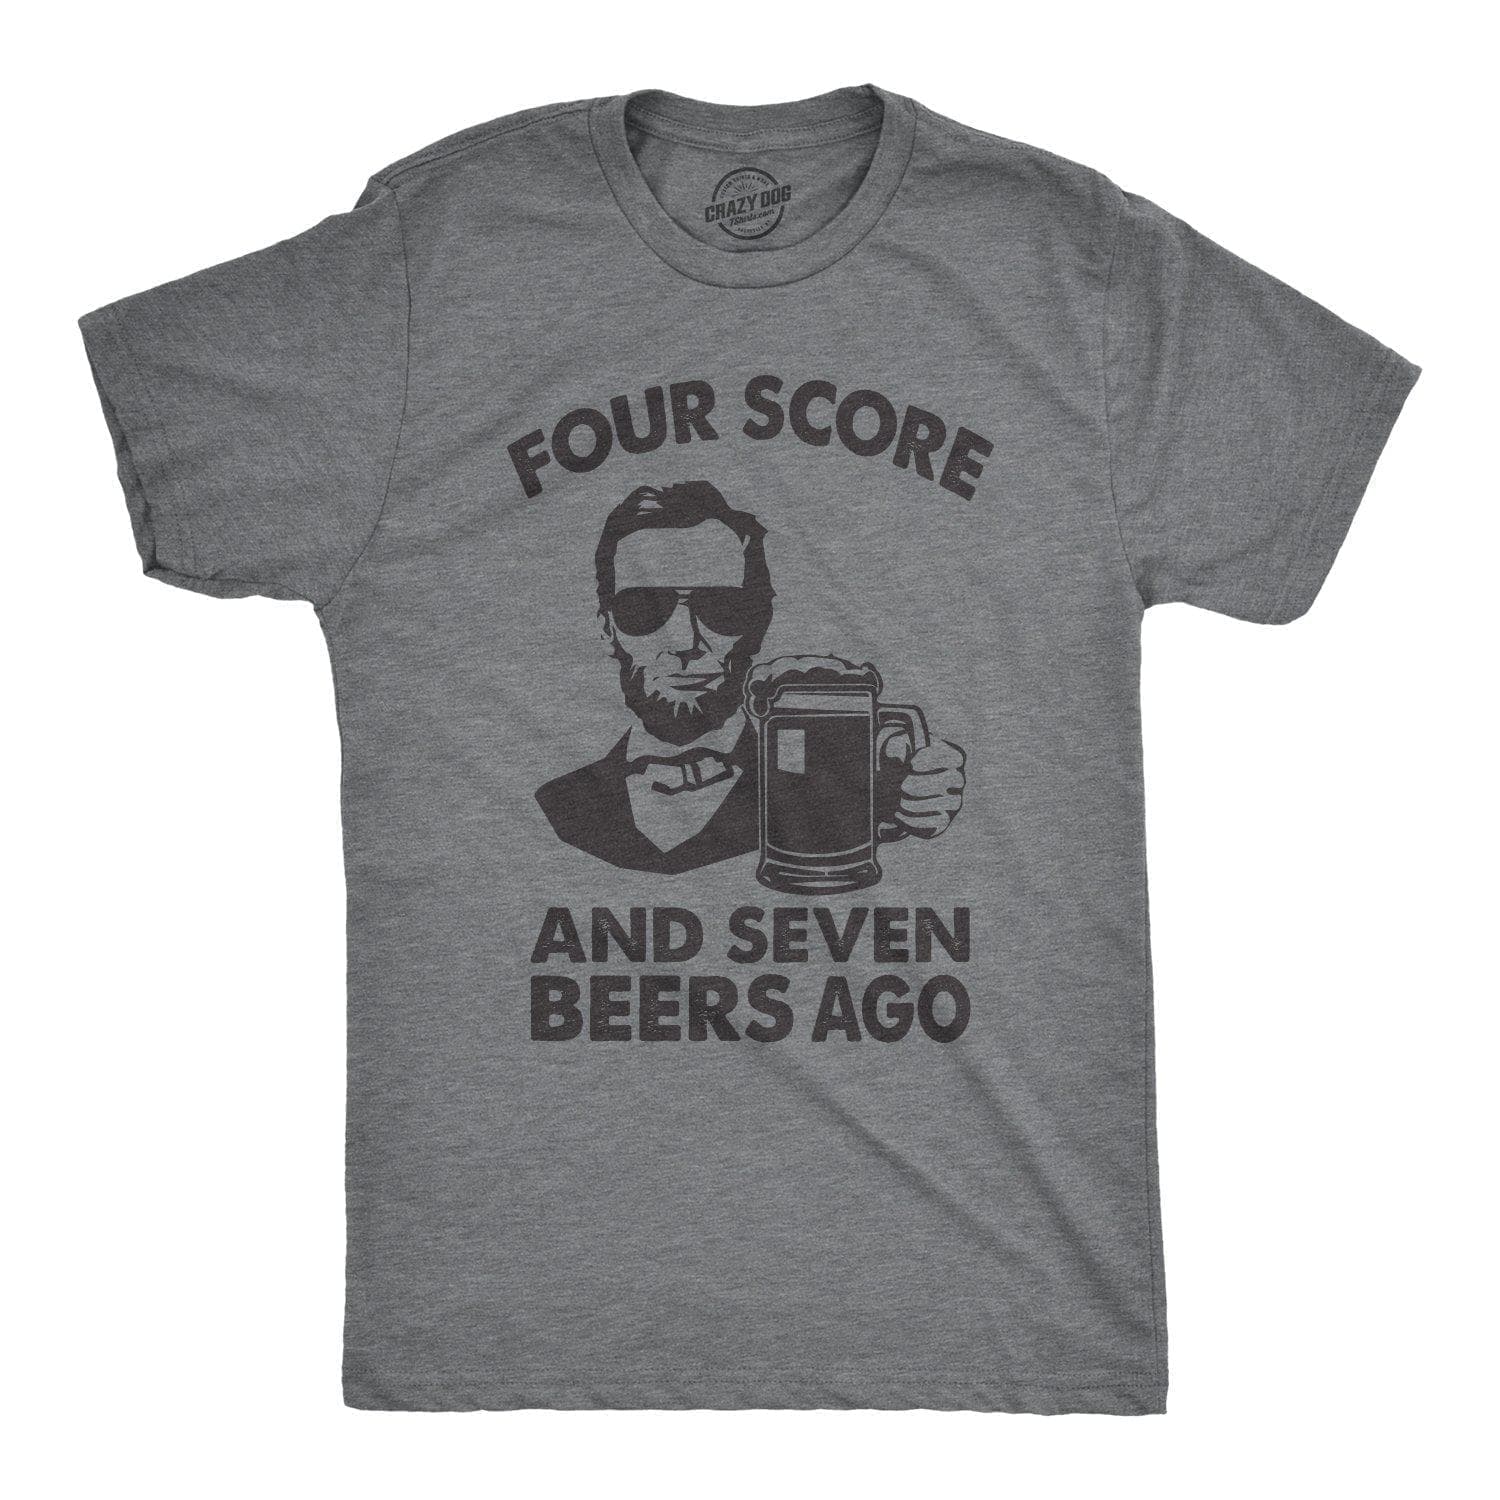 Four Score And Seven Beers Ago Men's Tshirt  -  Crazy Dog T-Shirts